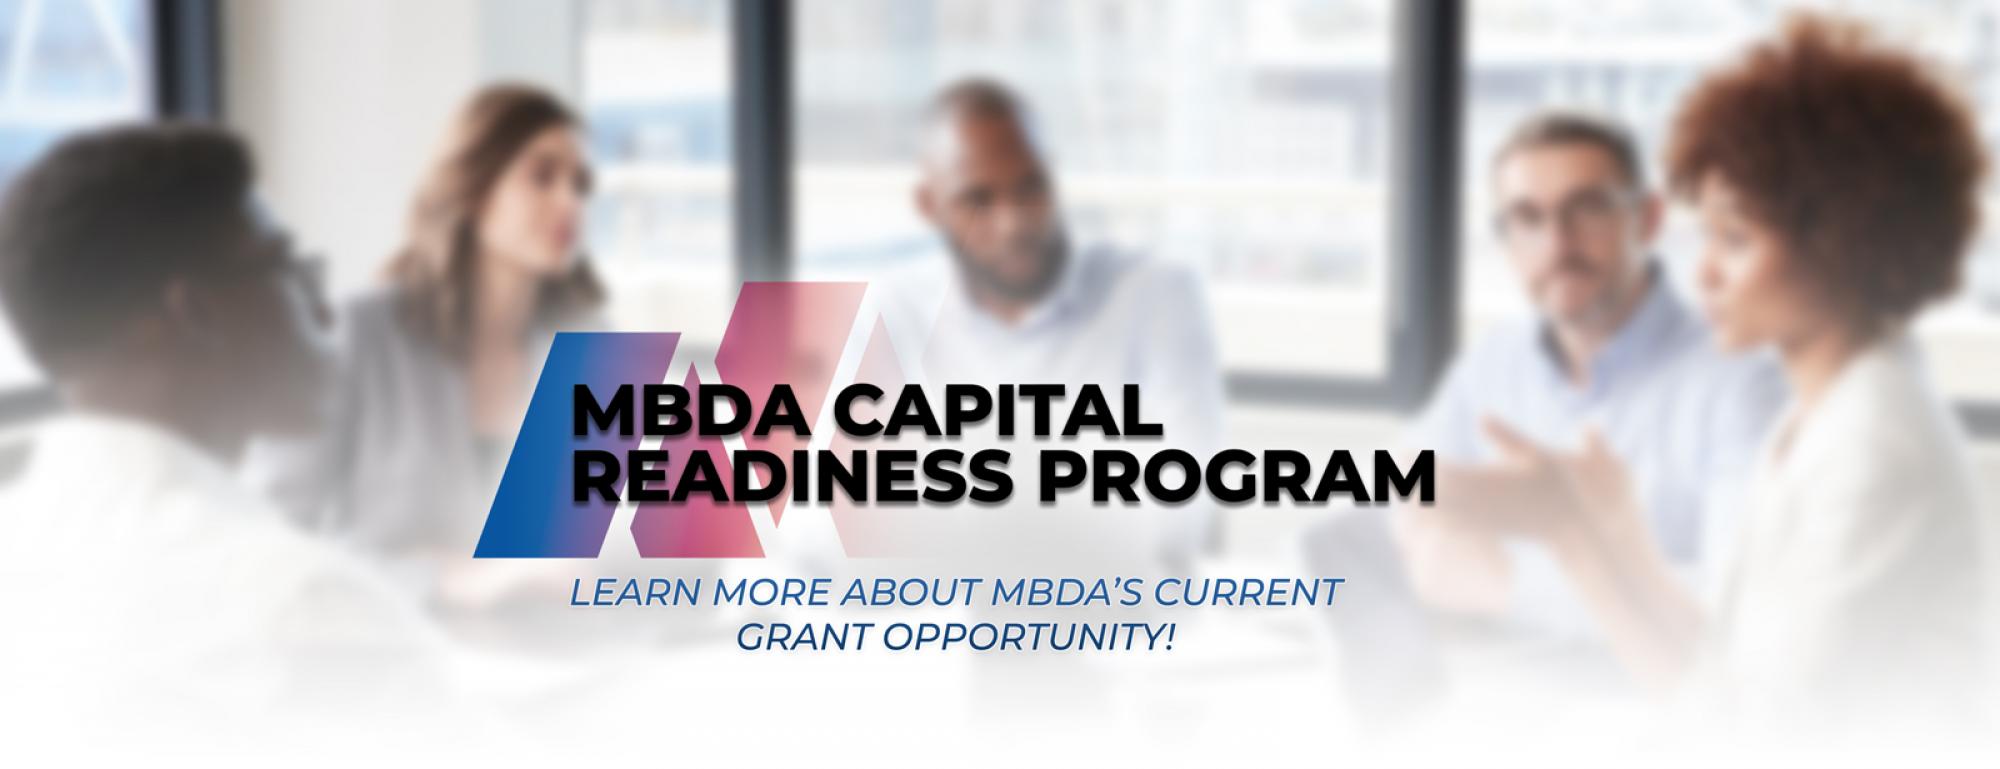 Learn More About MBDA's Current Grant Opportunity 